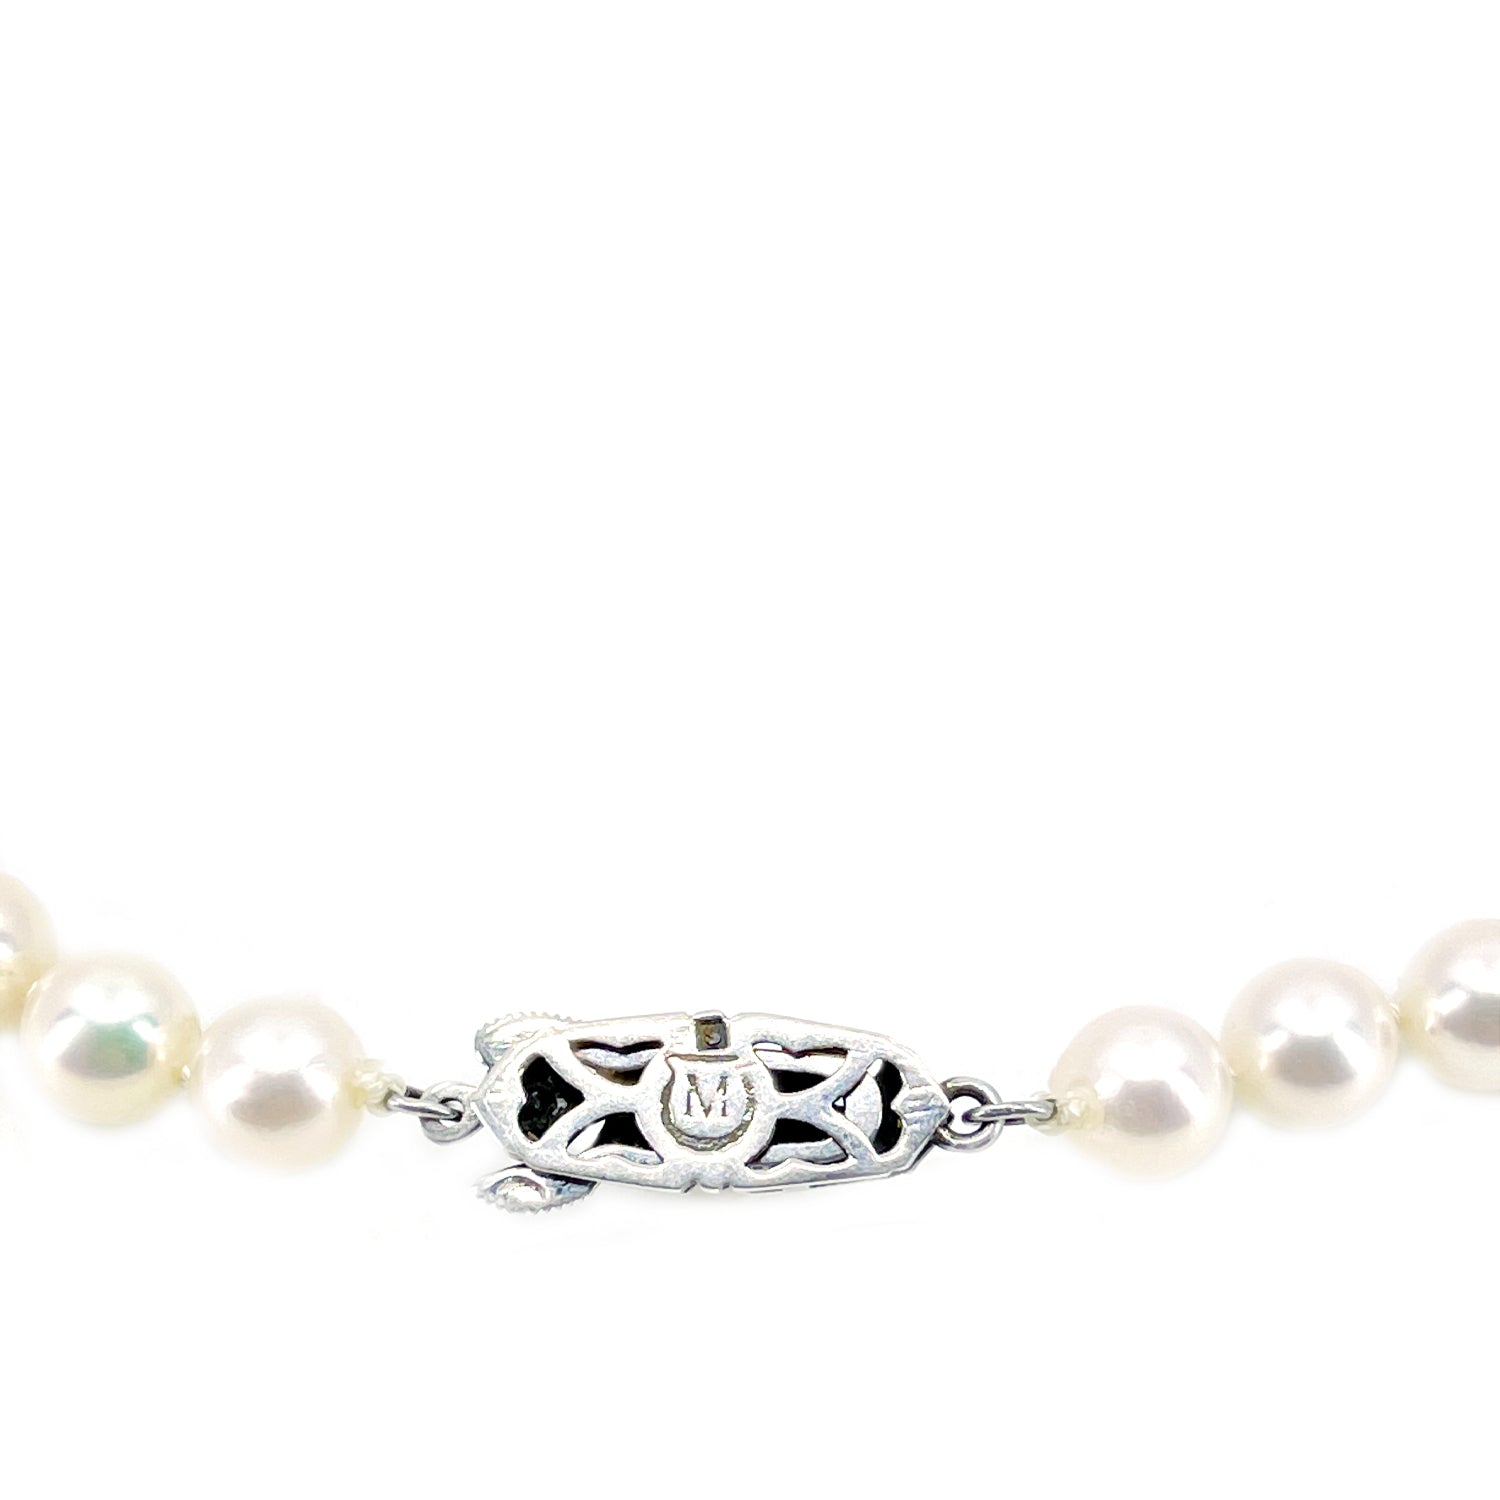 Mikimoto Japanese Cultured Akoya Pearl Retro Beaded Strand Choker Necklace- Sterling Silver 16 Inch